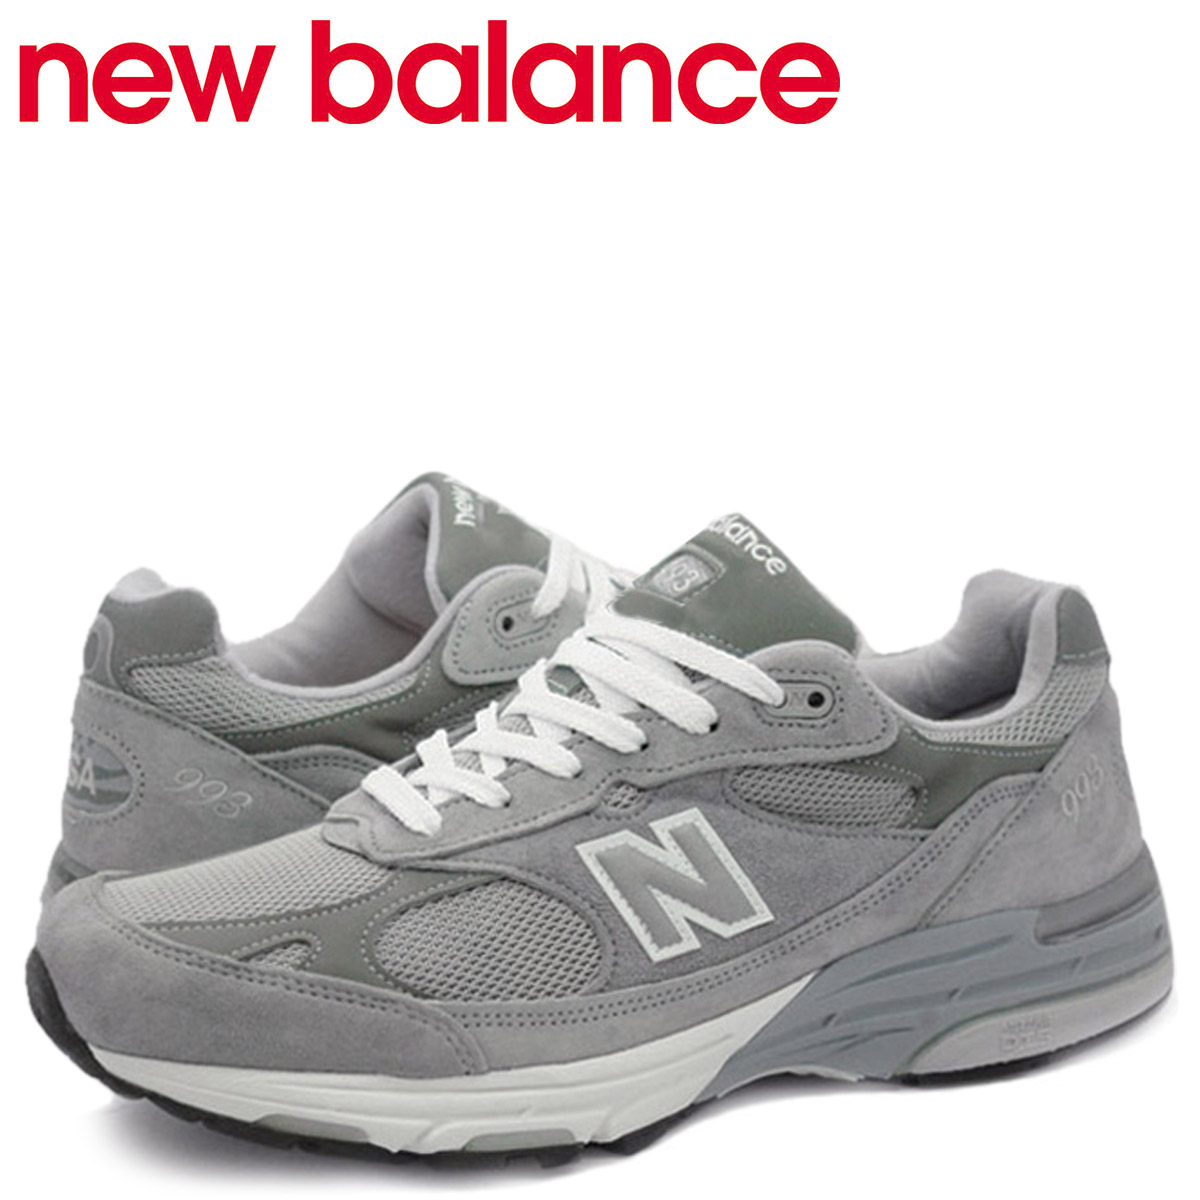 new balance 993 made in uk